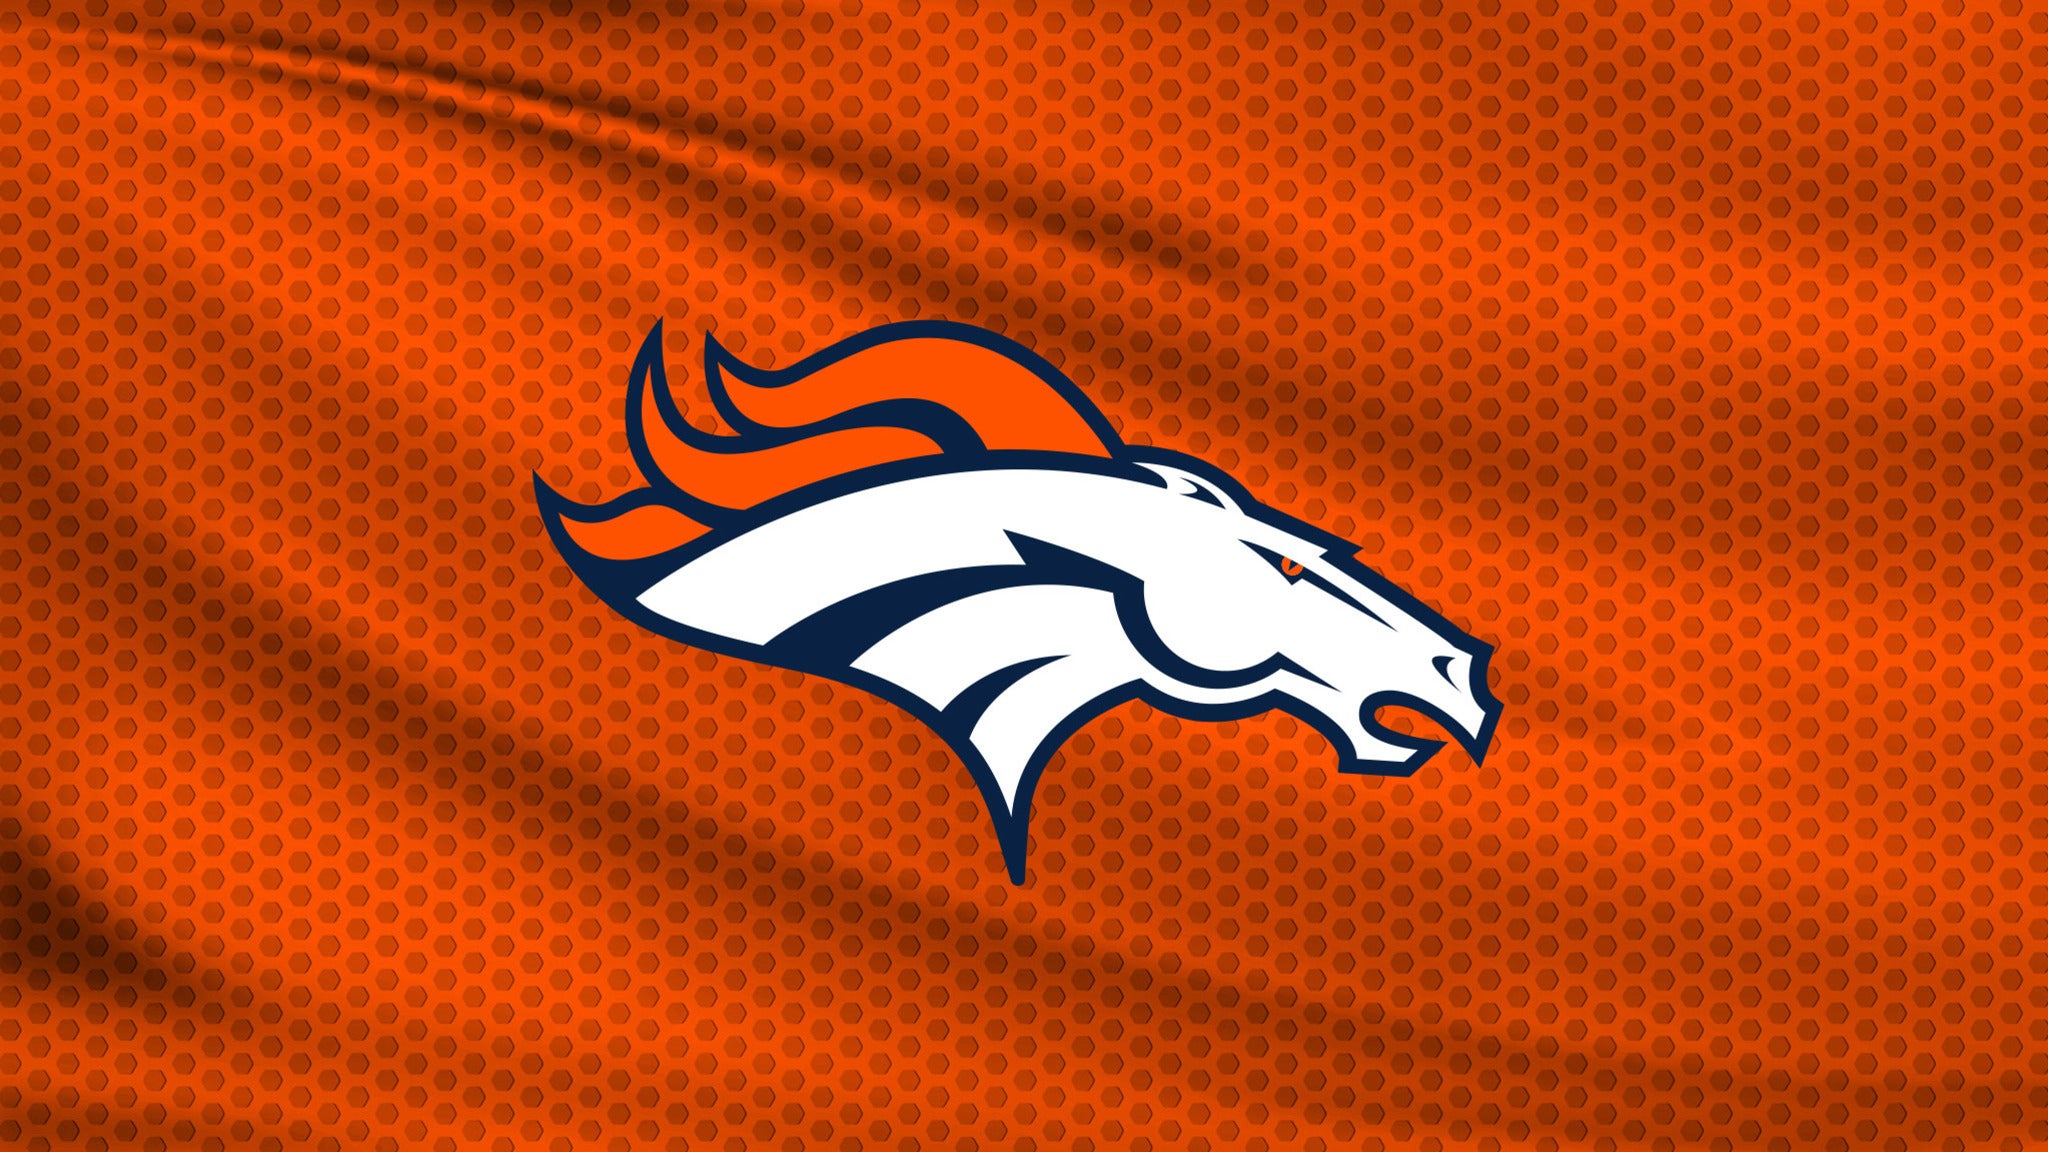 where to buy broncos tickets